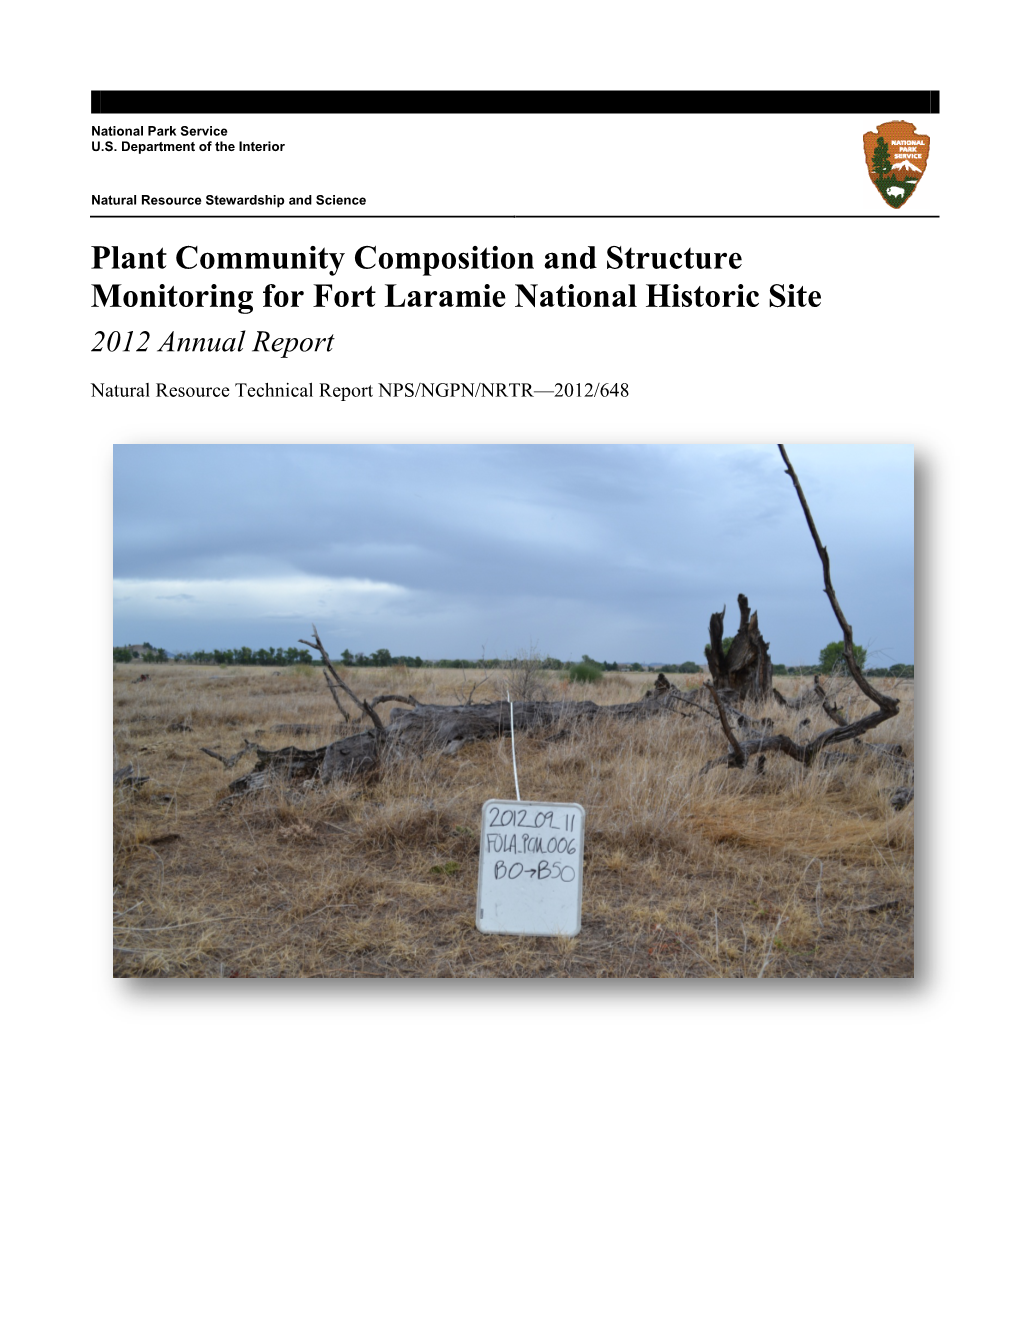 Plant Community Composition and Structure Monitoring for Fort Laramie National Historic Site 2012 Annual Report